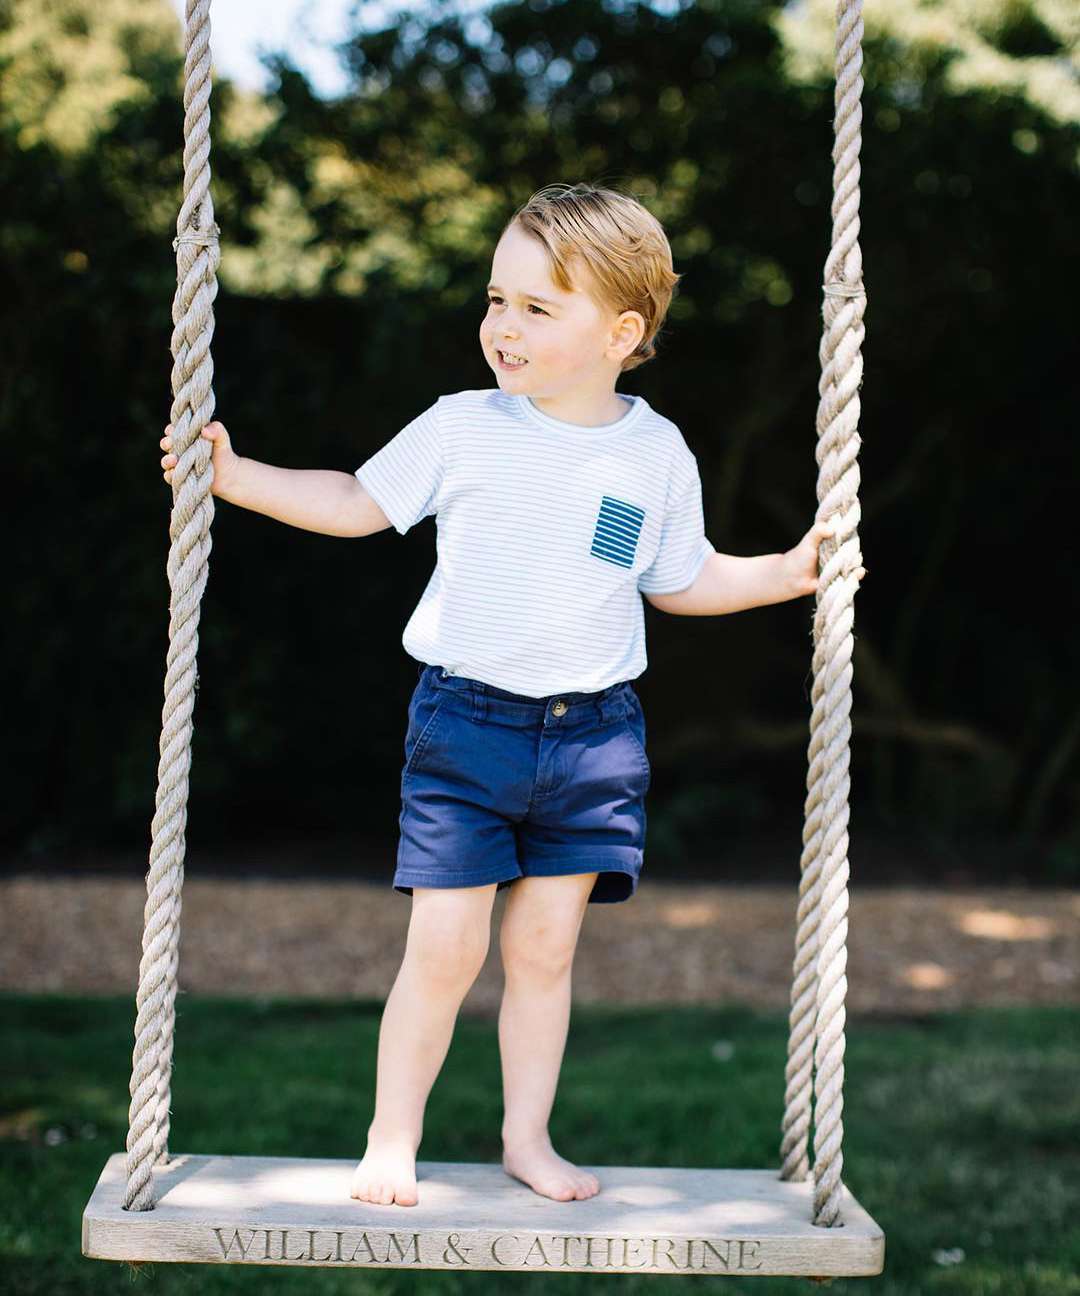 Prince George Was "Far Too Spoiled" on His 3rd Birthday | InStyle